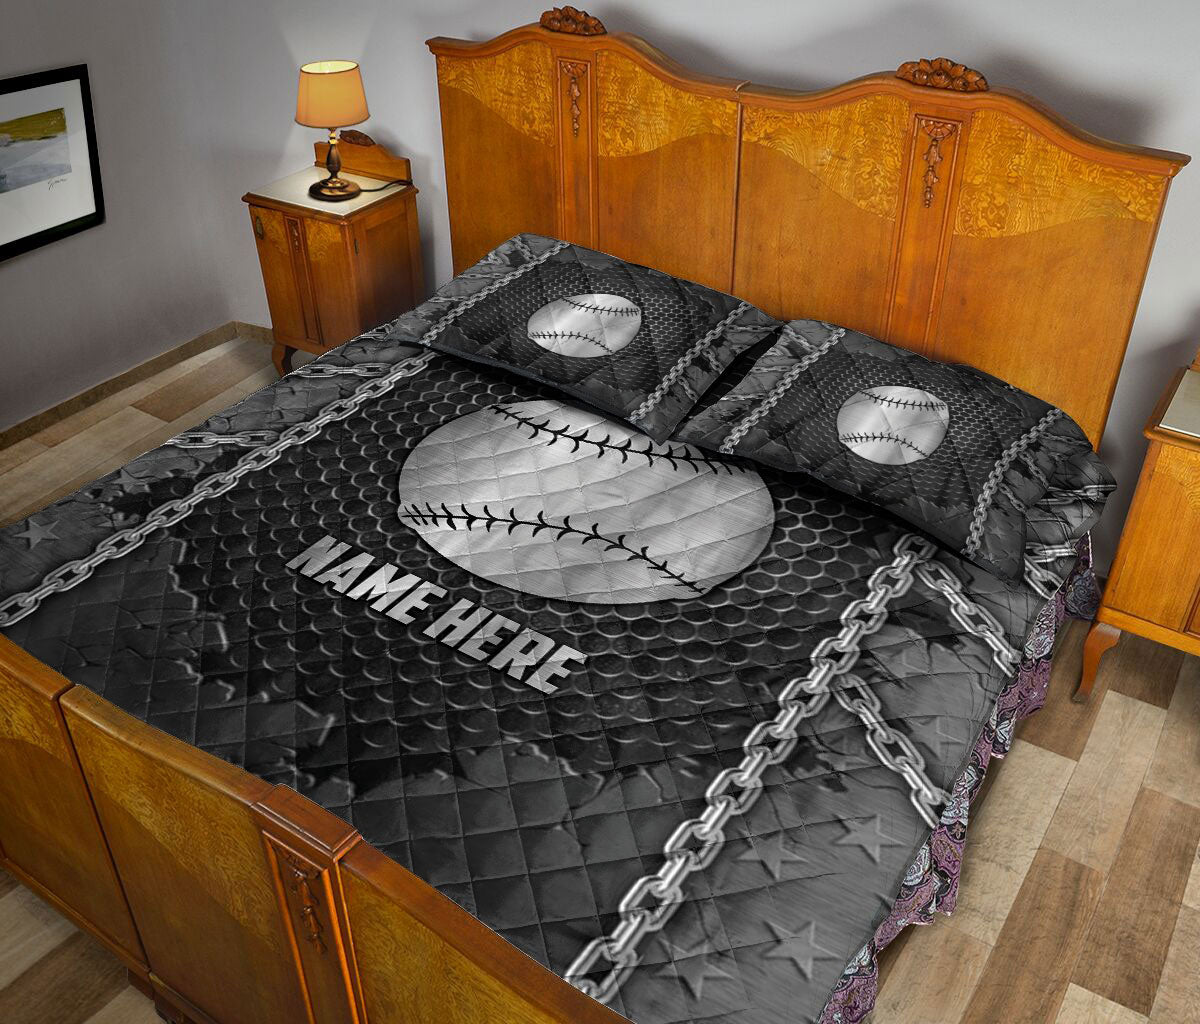 Ohaprints-Quilt-Bed-Set-Pillowcase-Softball-Iron-Chain-Pattern-Unique-Gifts-Custom-Personalized-Name-Blanket-Bedspread-Bedding-556-King (90'' x 100'')